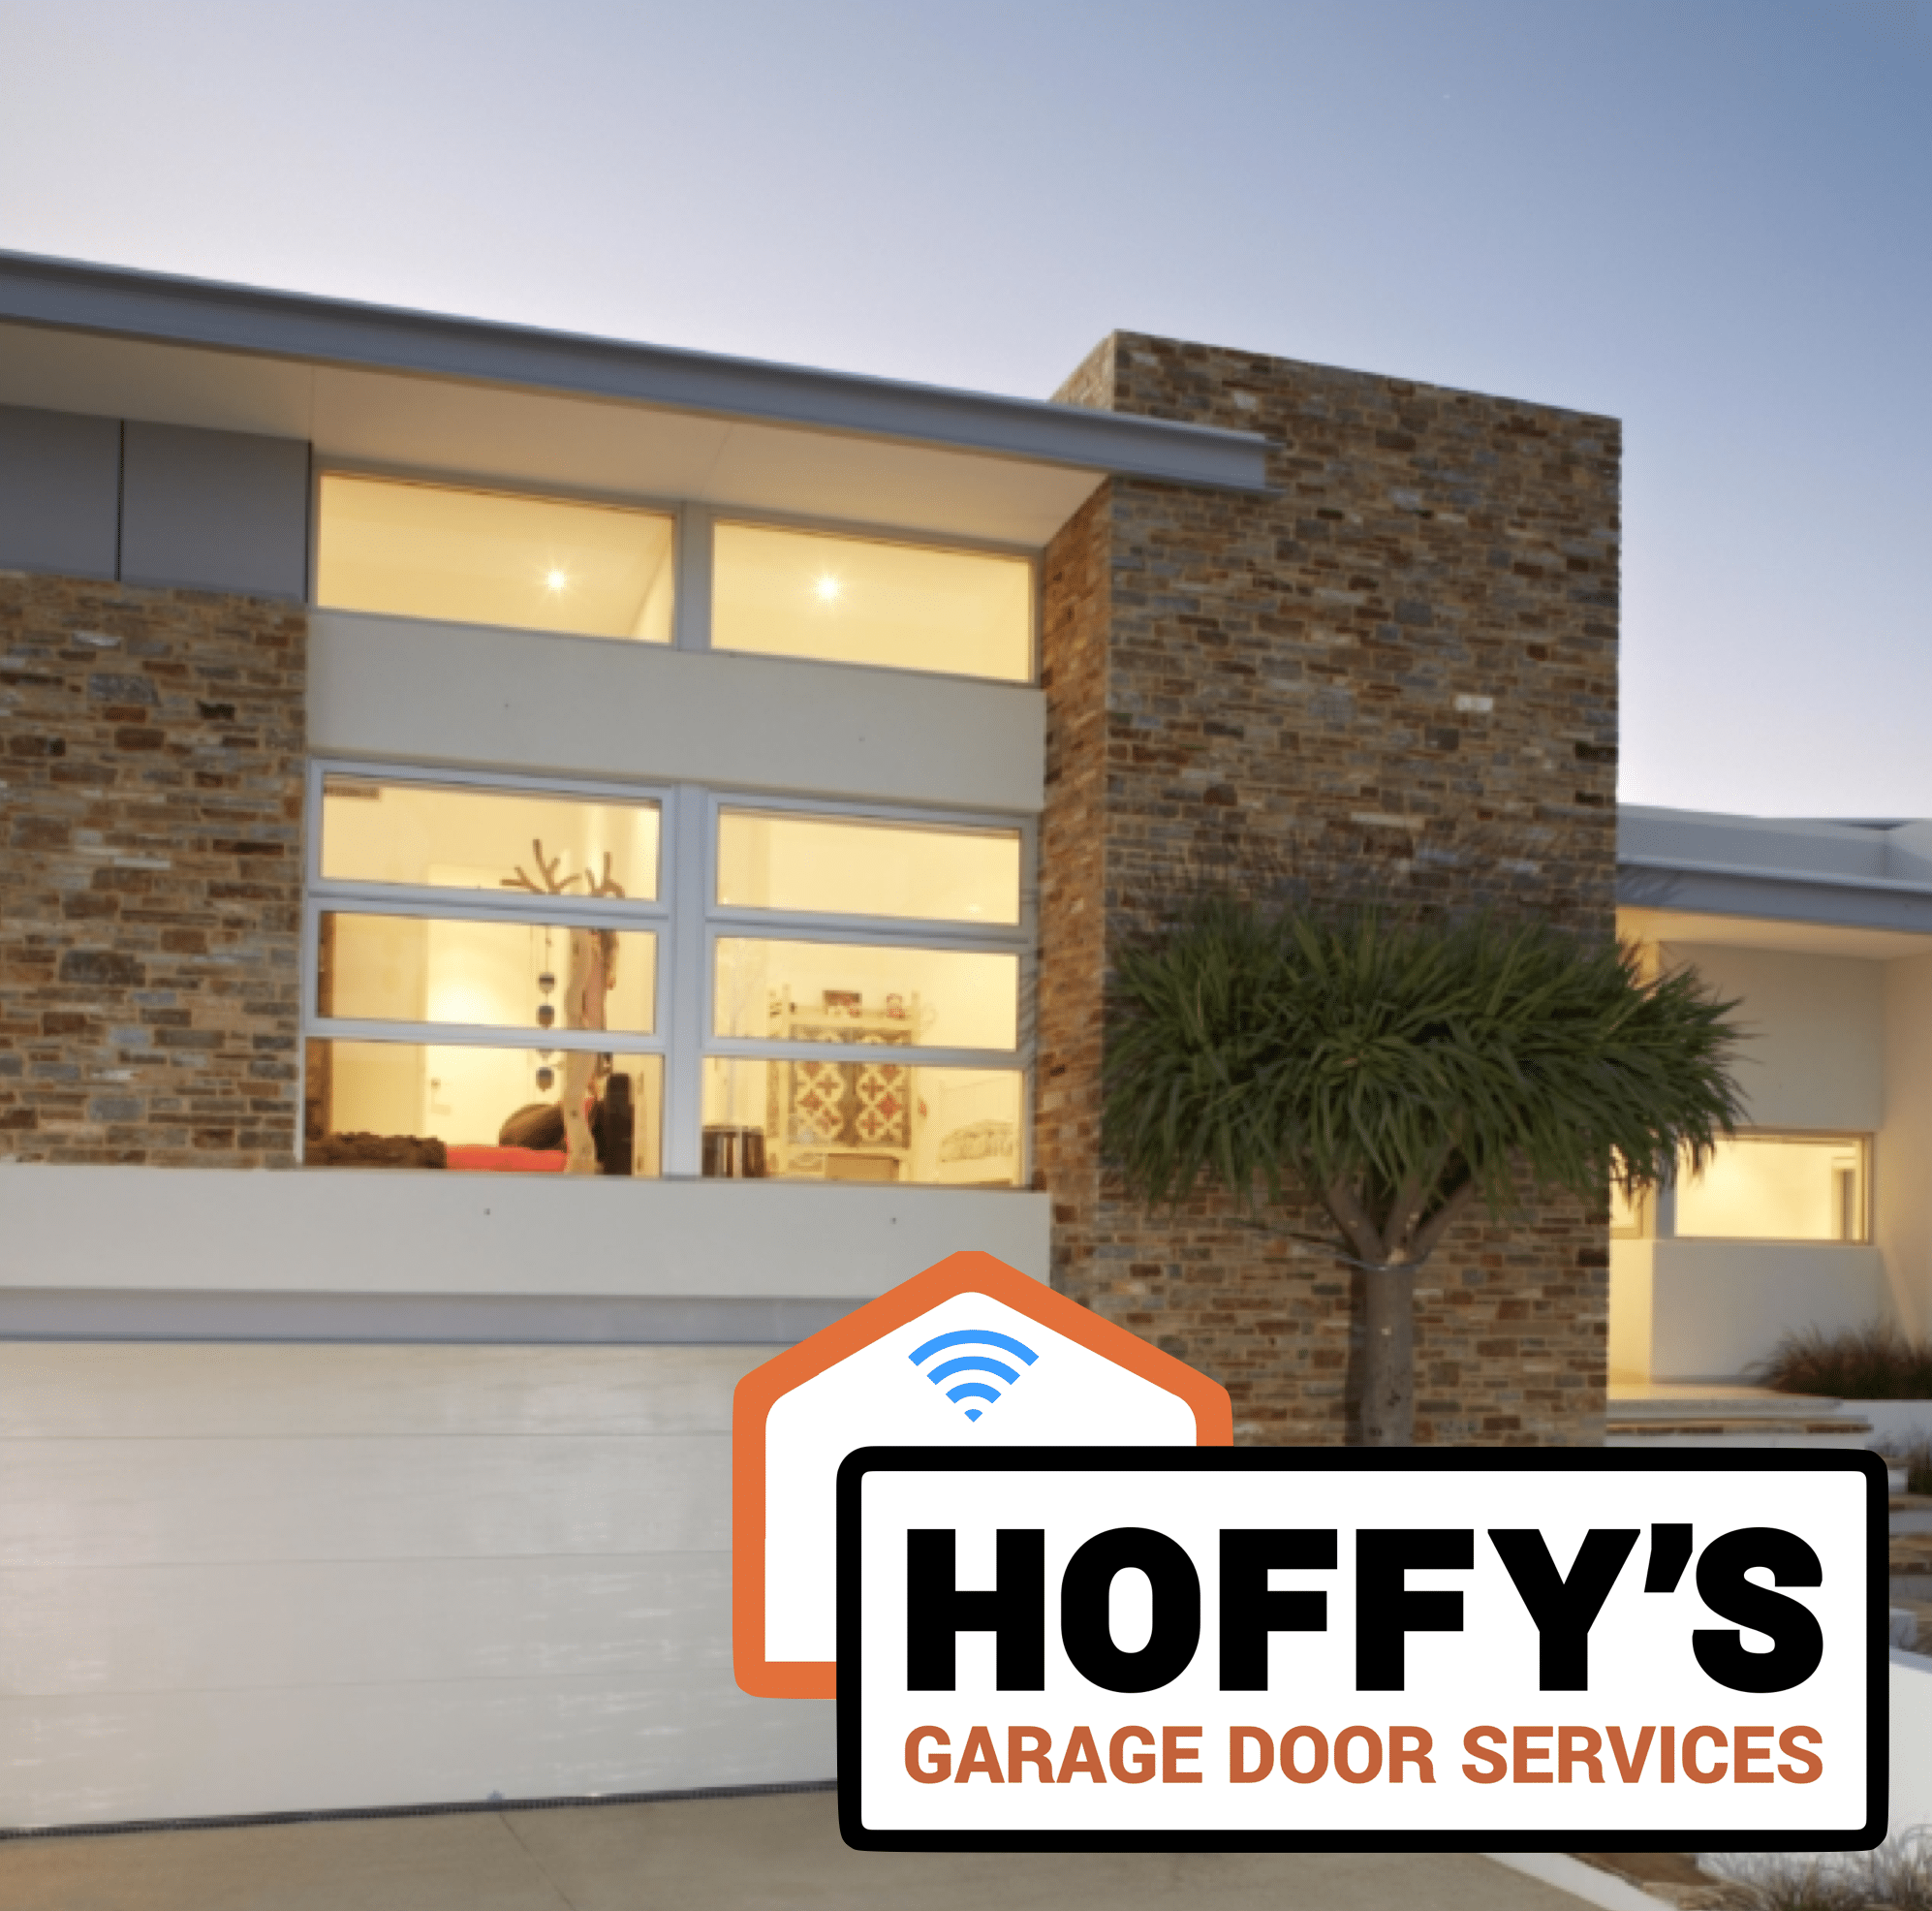 hoffys-garage-door-services-small-logo-with-house